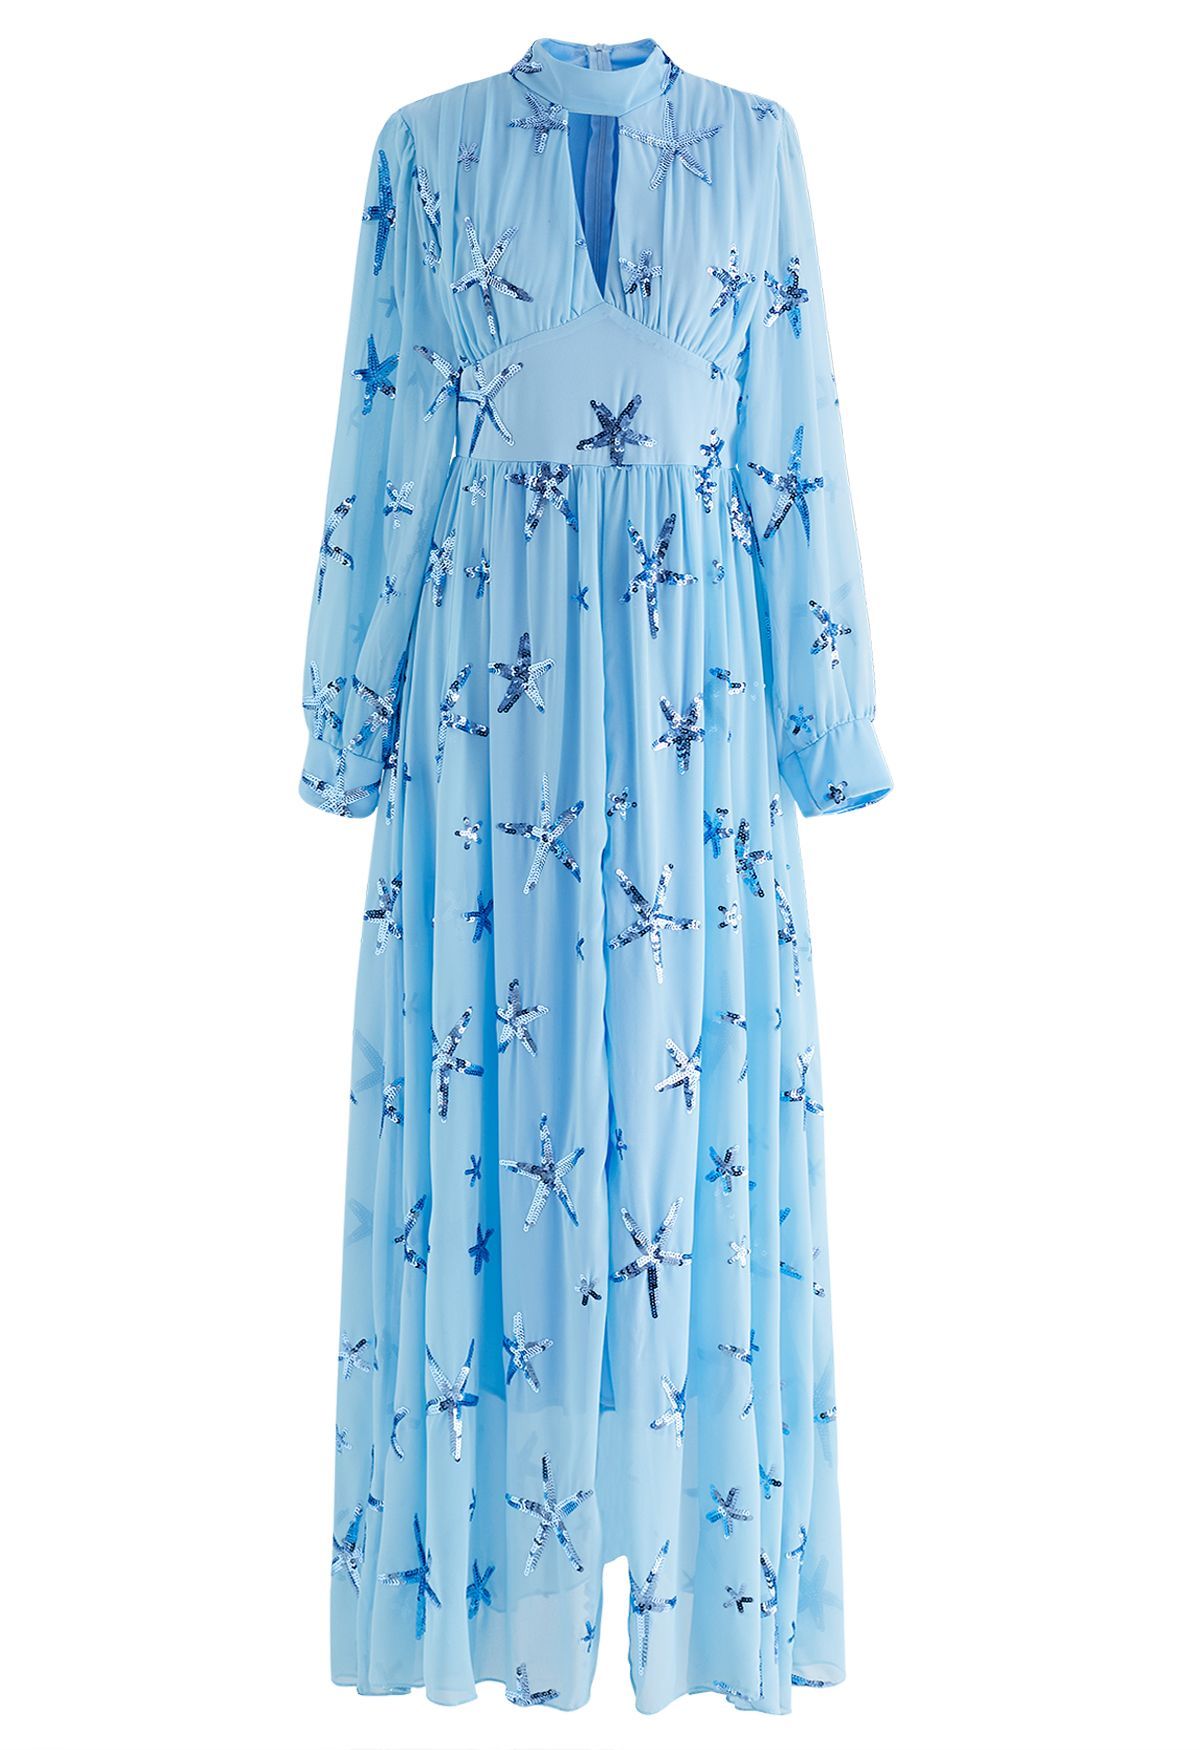 Stars Sequin-Embellished Front Slip Maxi Dress in Blue | Chicwish